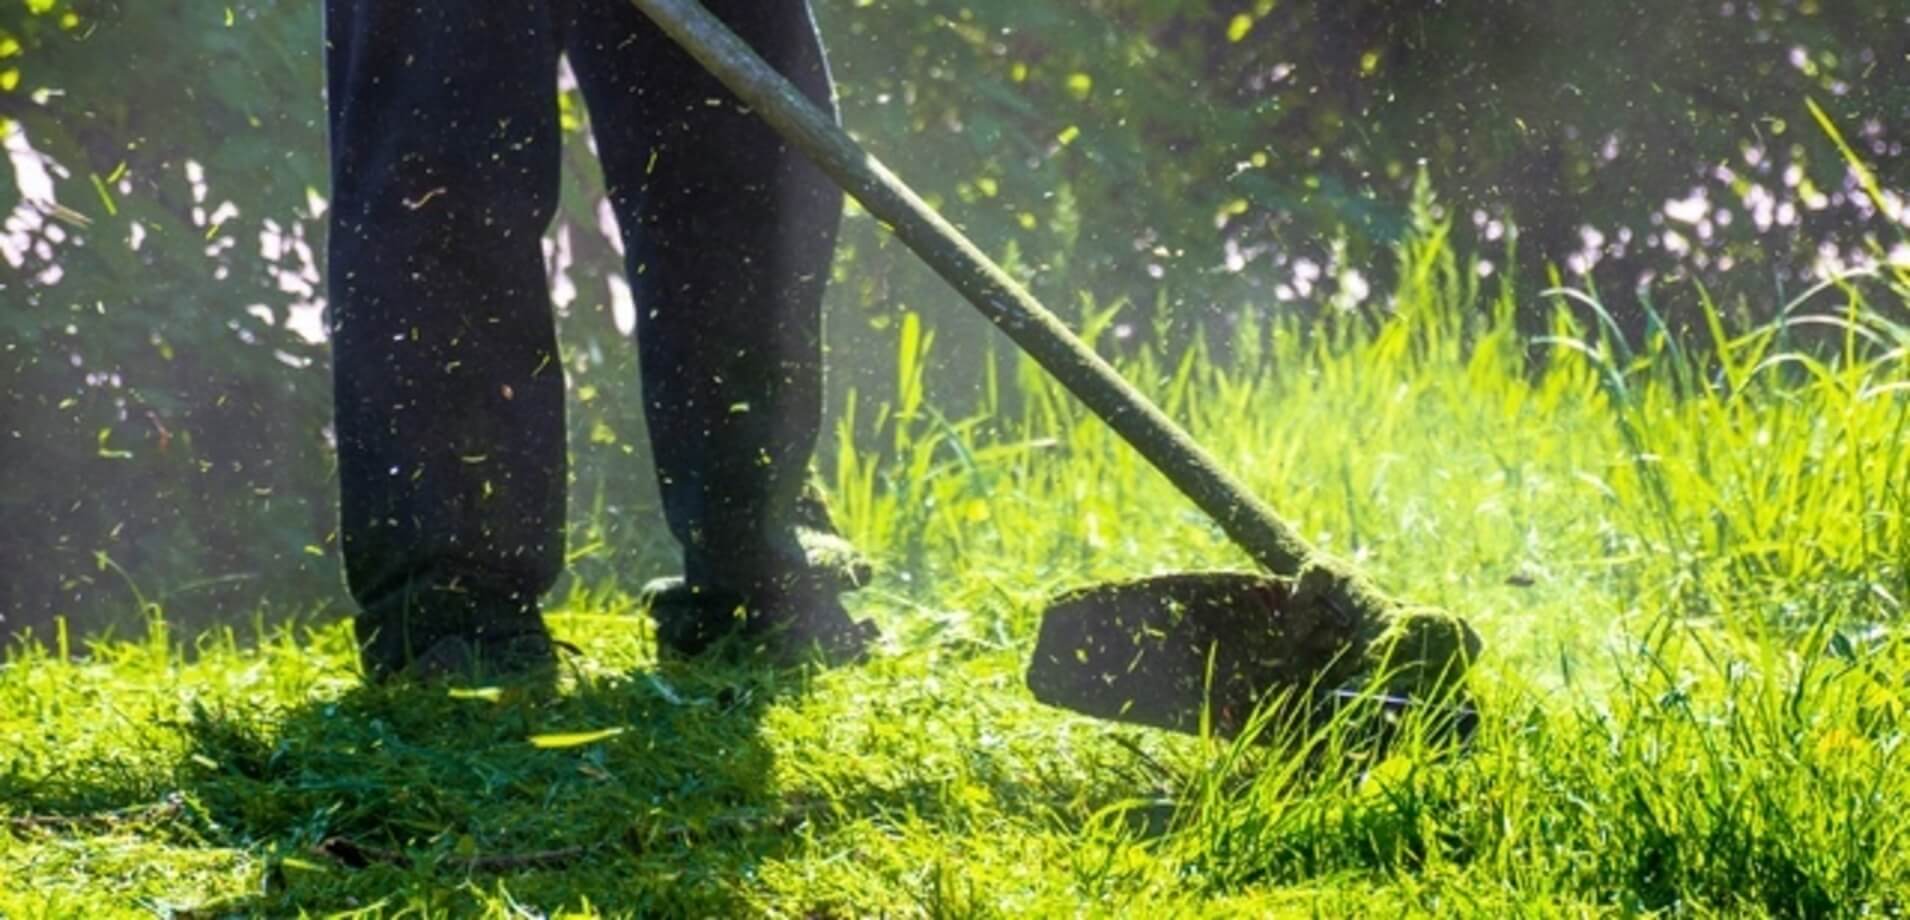 Choosing the right lawn service provider